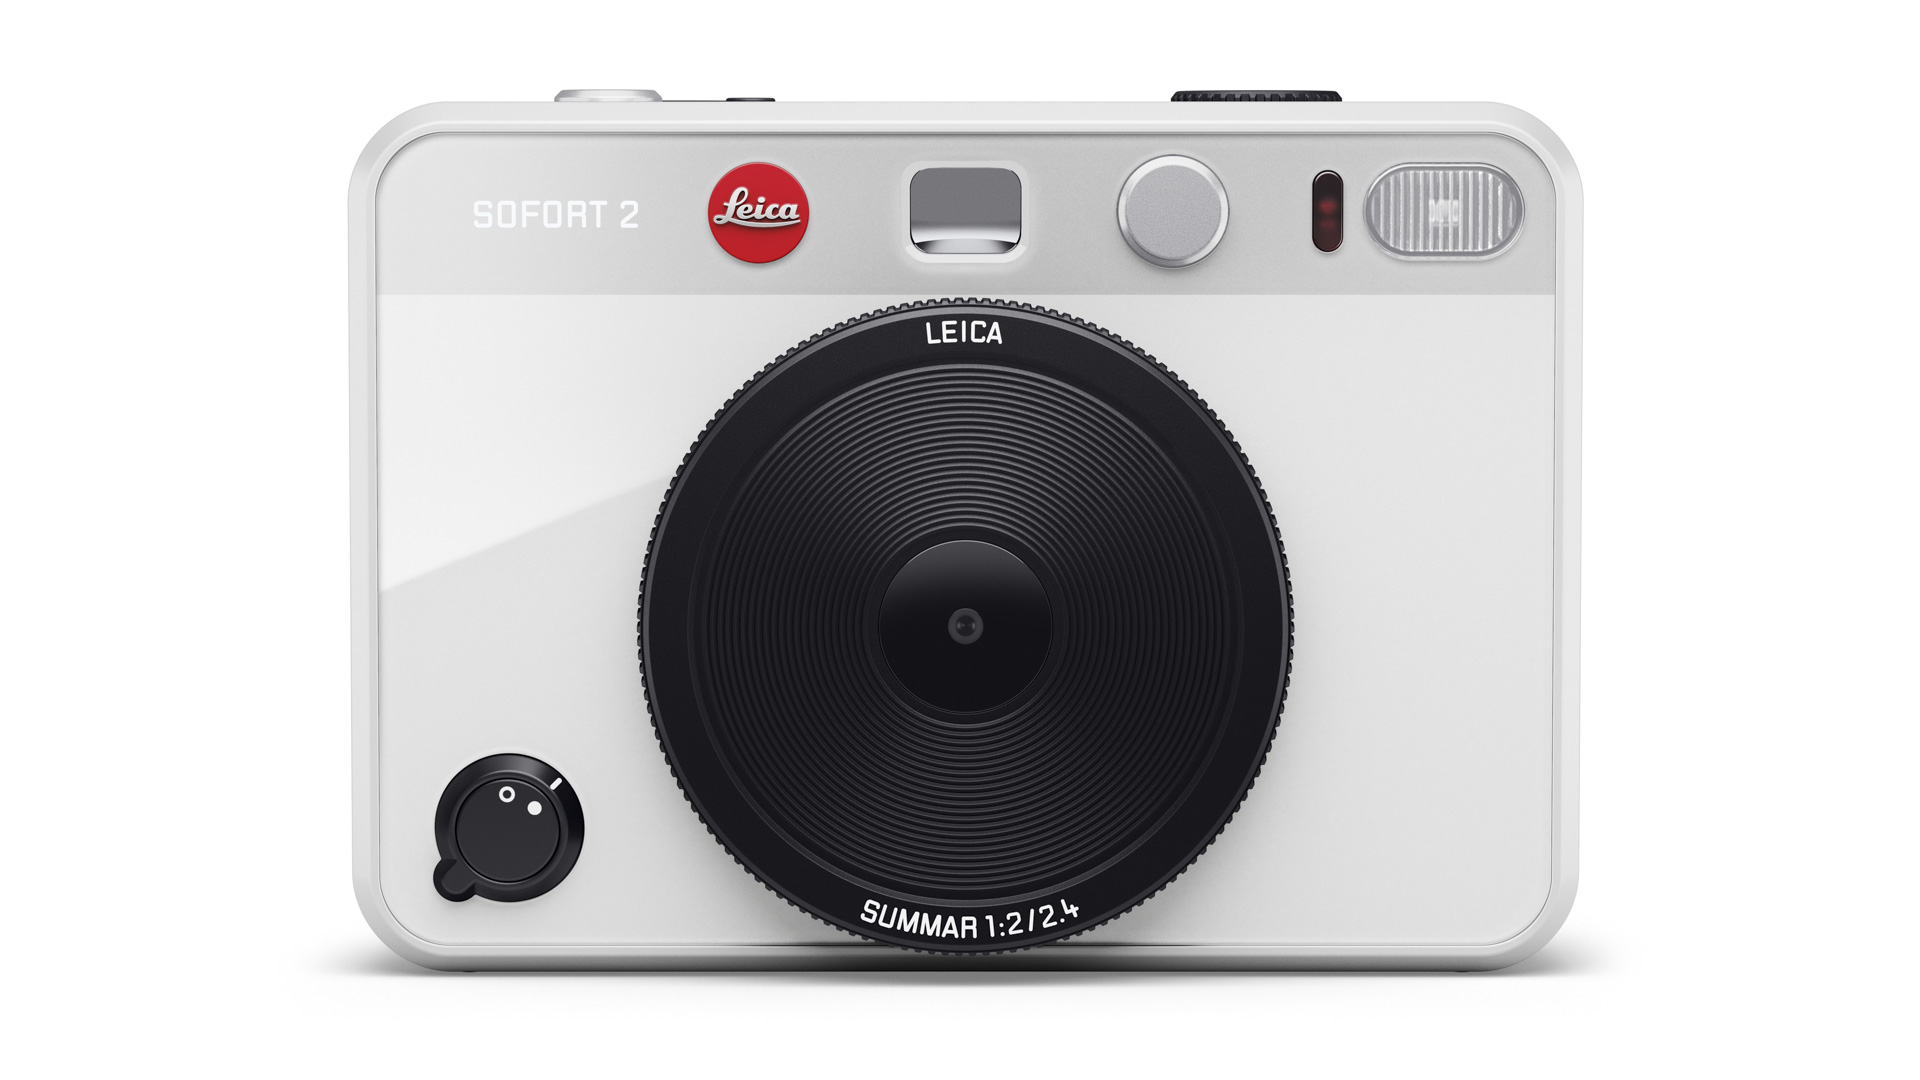 Leica Sofort 2 instant camera in white, on a white background